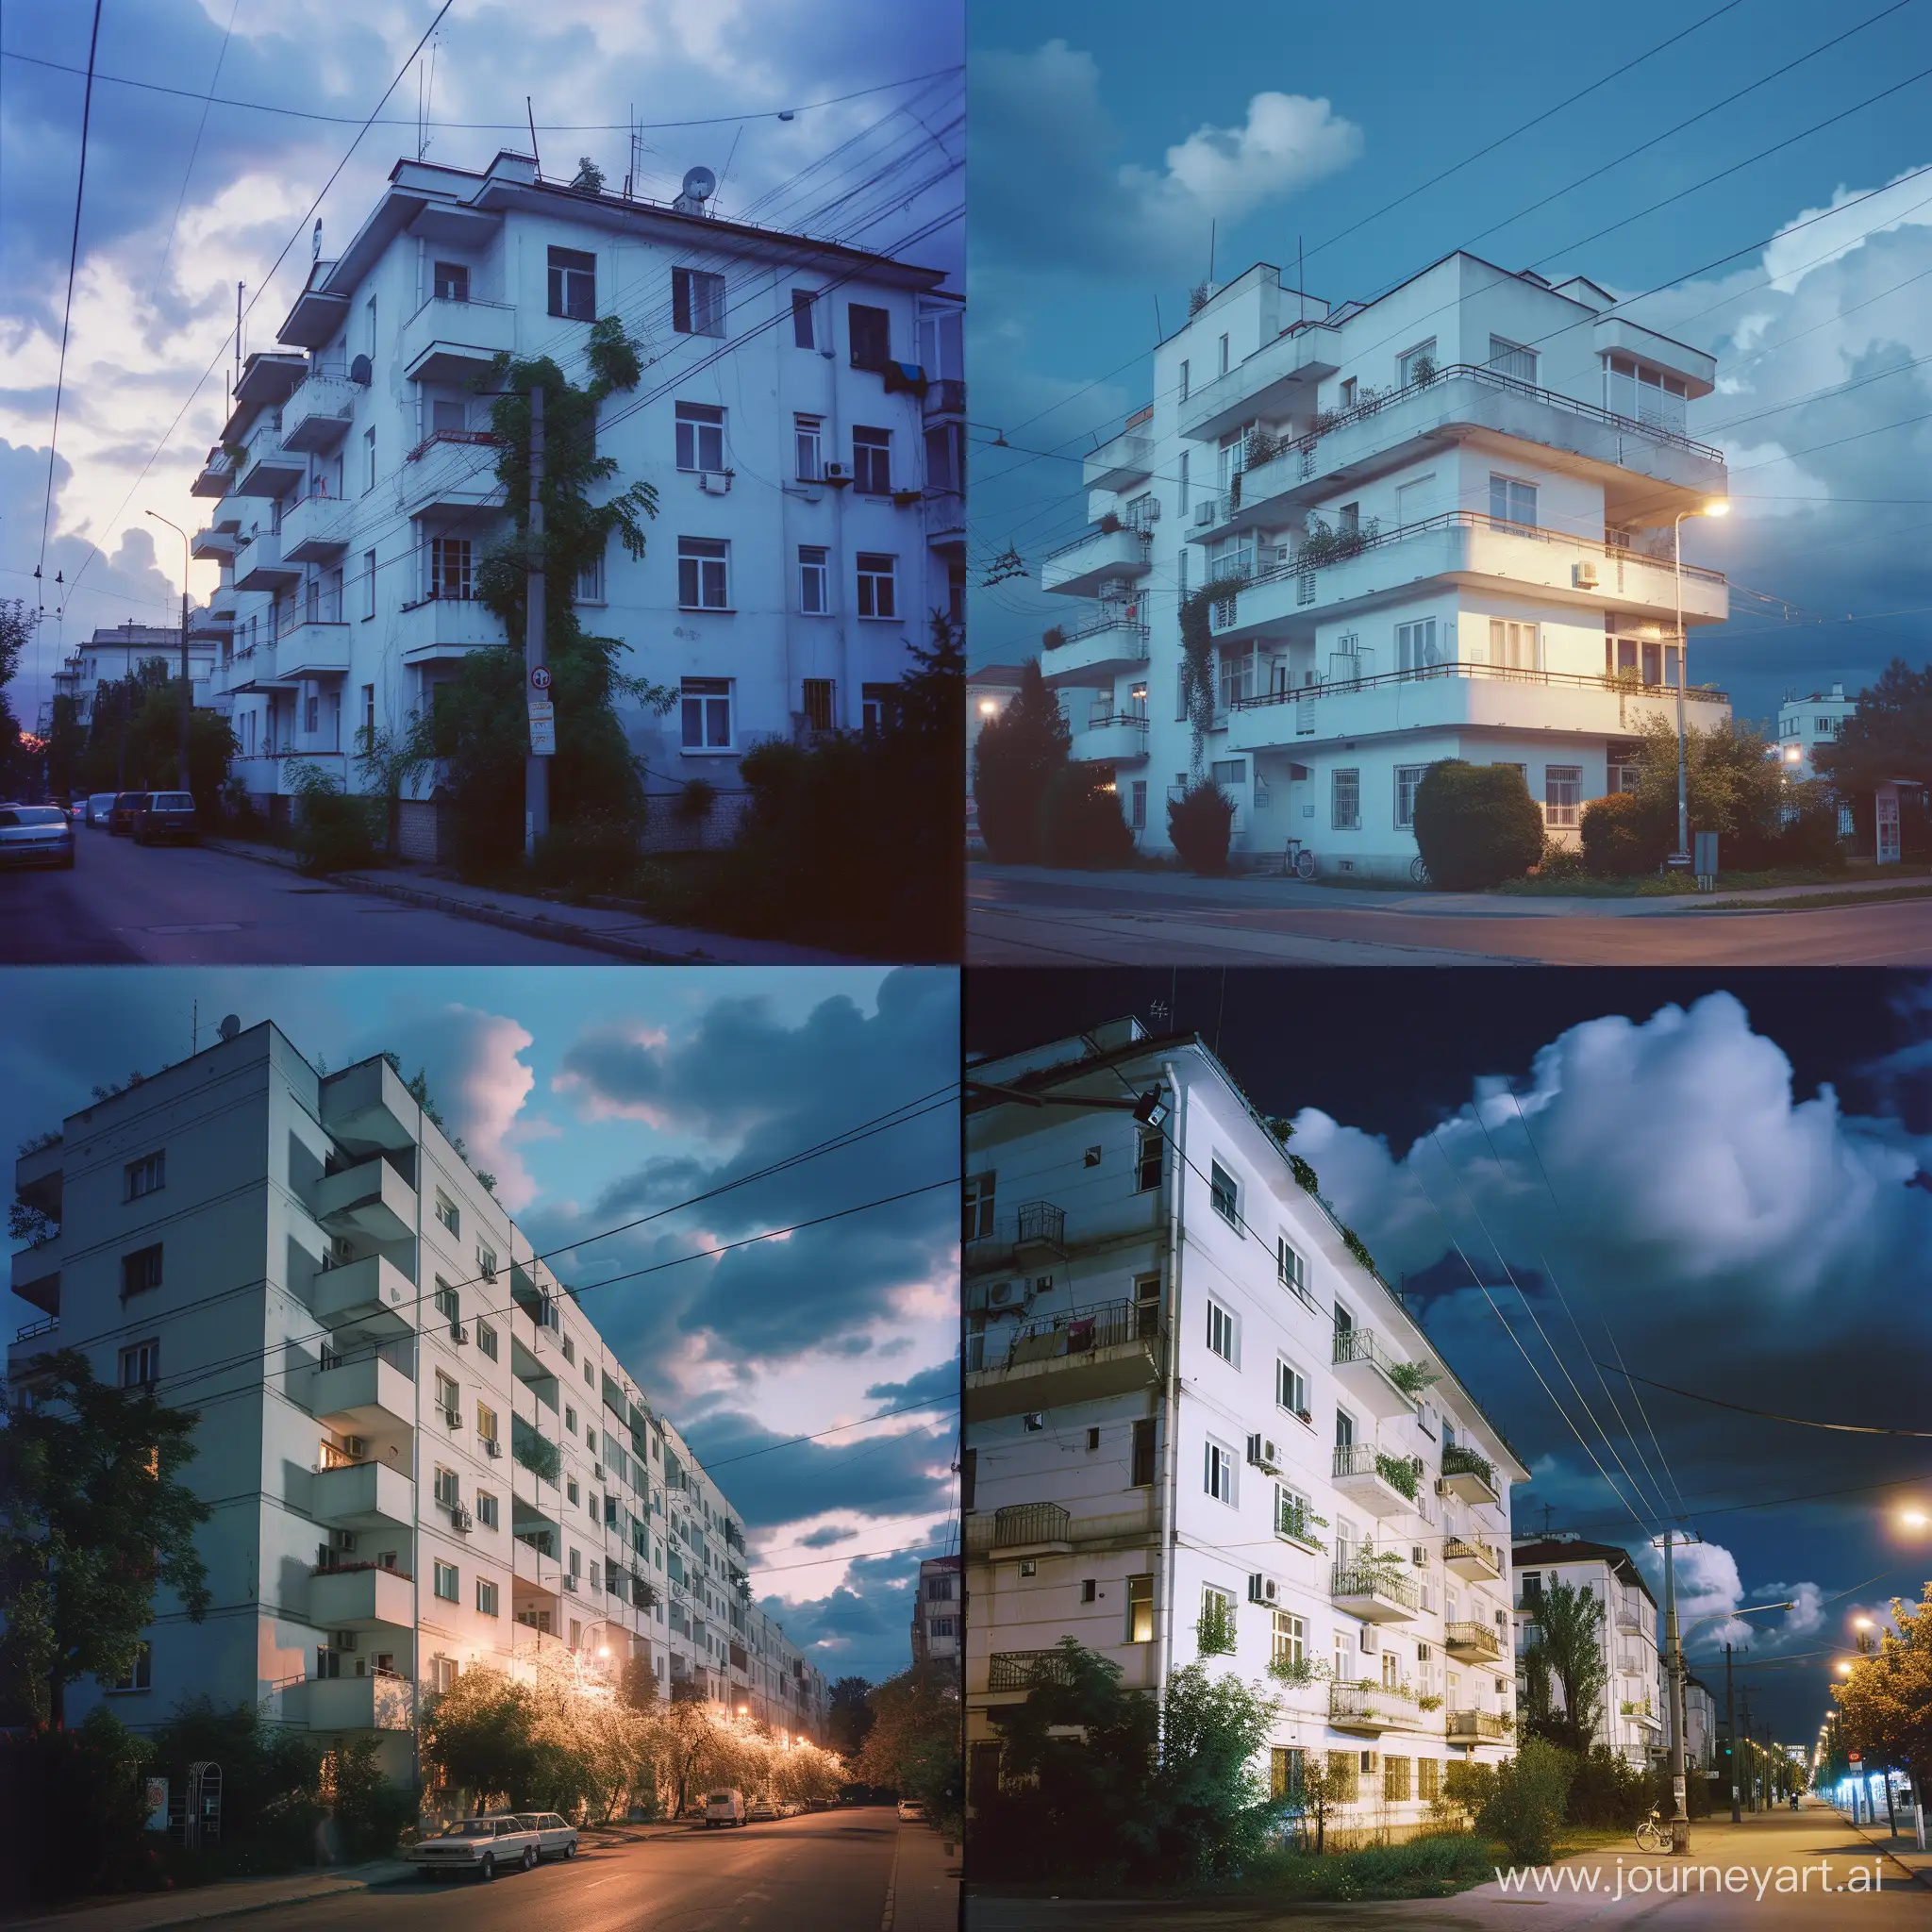 rich bucharest romania shot by edward hopper,magazine about clean liminal spaces aesthetics,underexposed medium format film,overgrowth trim,ecological residential street,white microcement modernized apartment building,moody,walkable,soft fluffy clouds,2040s,shot at night,bloom,VHS tape colors,soft highlights,deep shadows,serene socialist ideals,public transportation,clean advertising,bike friendly